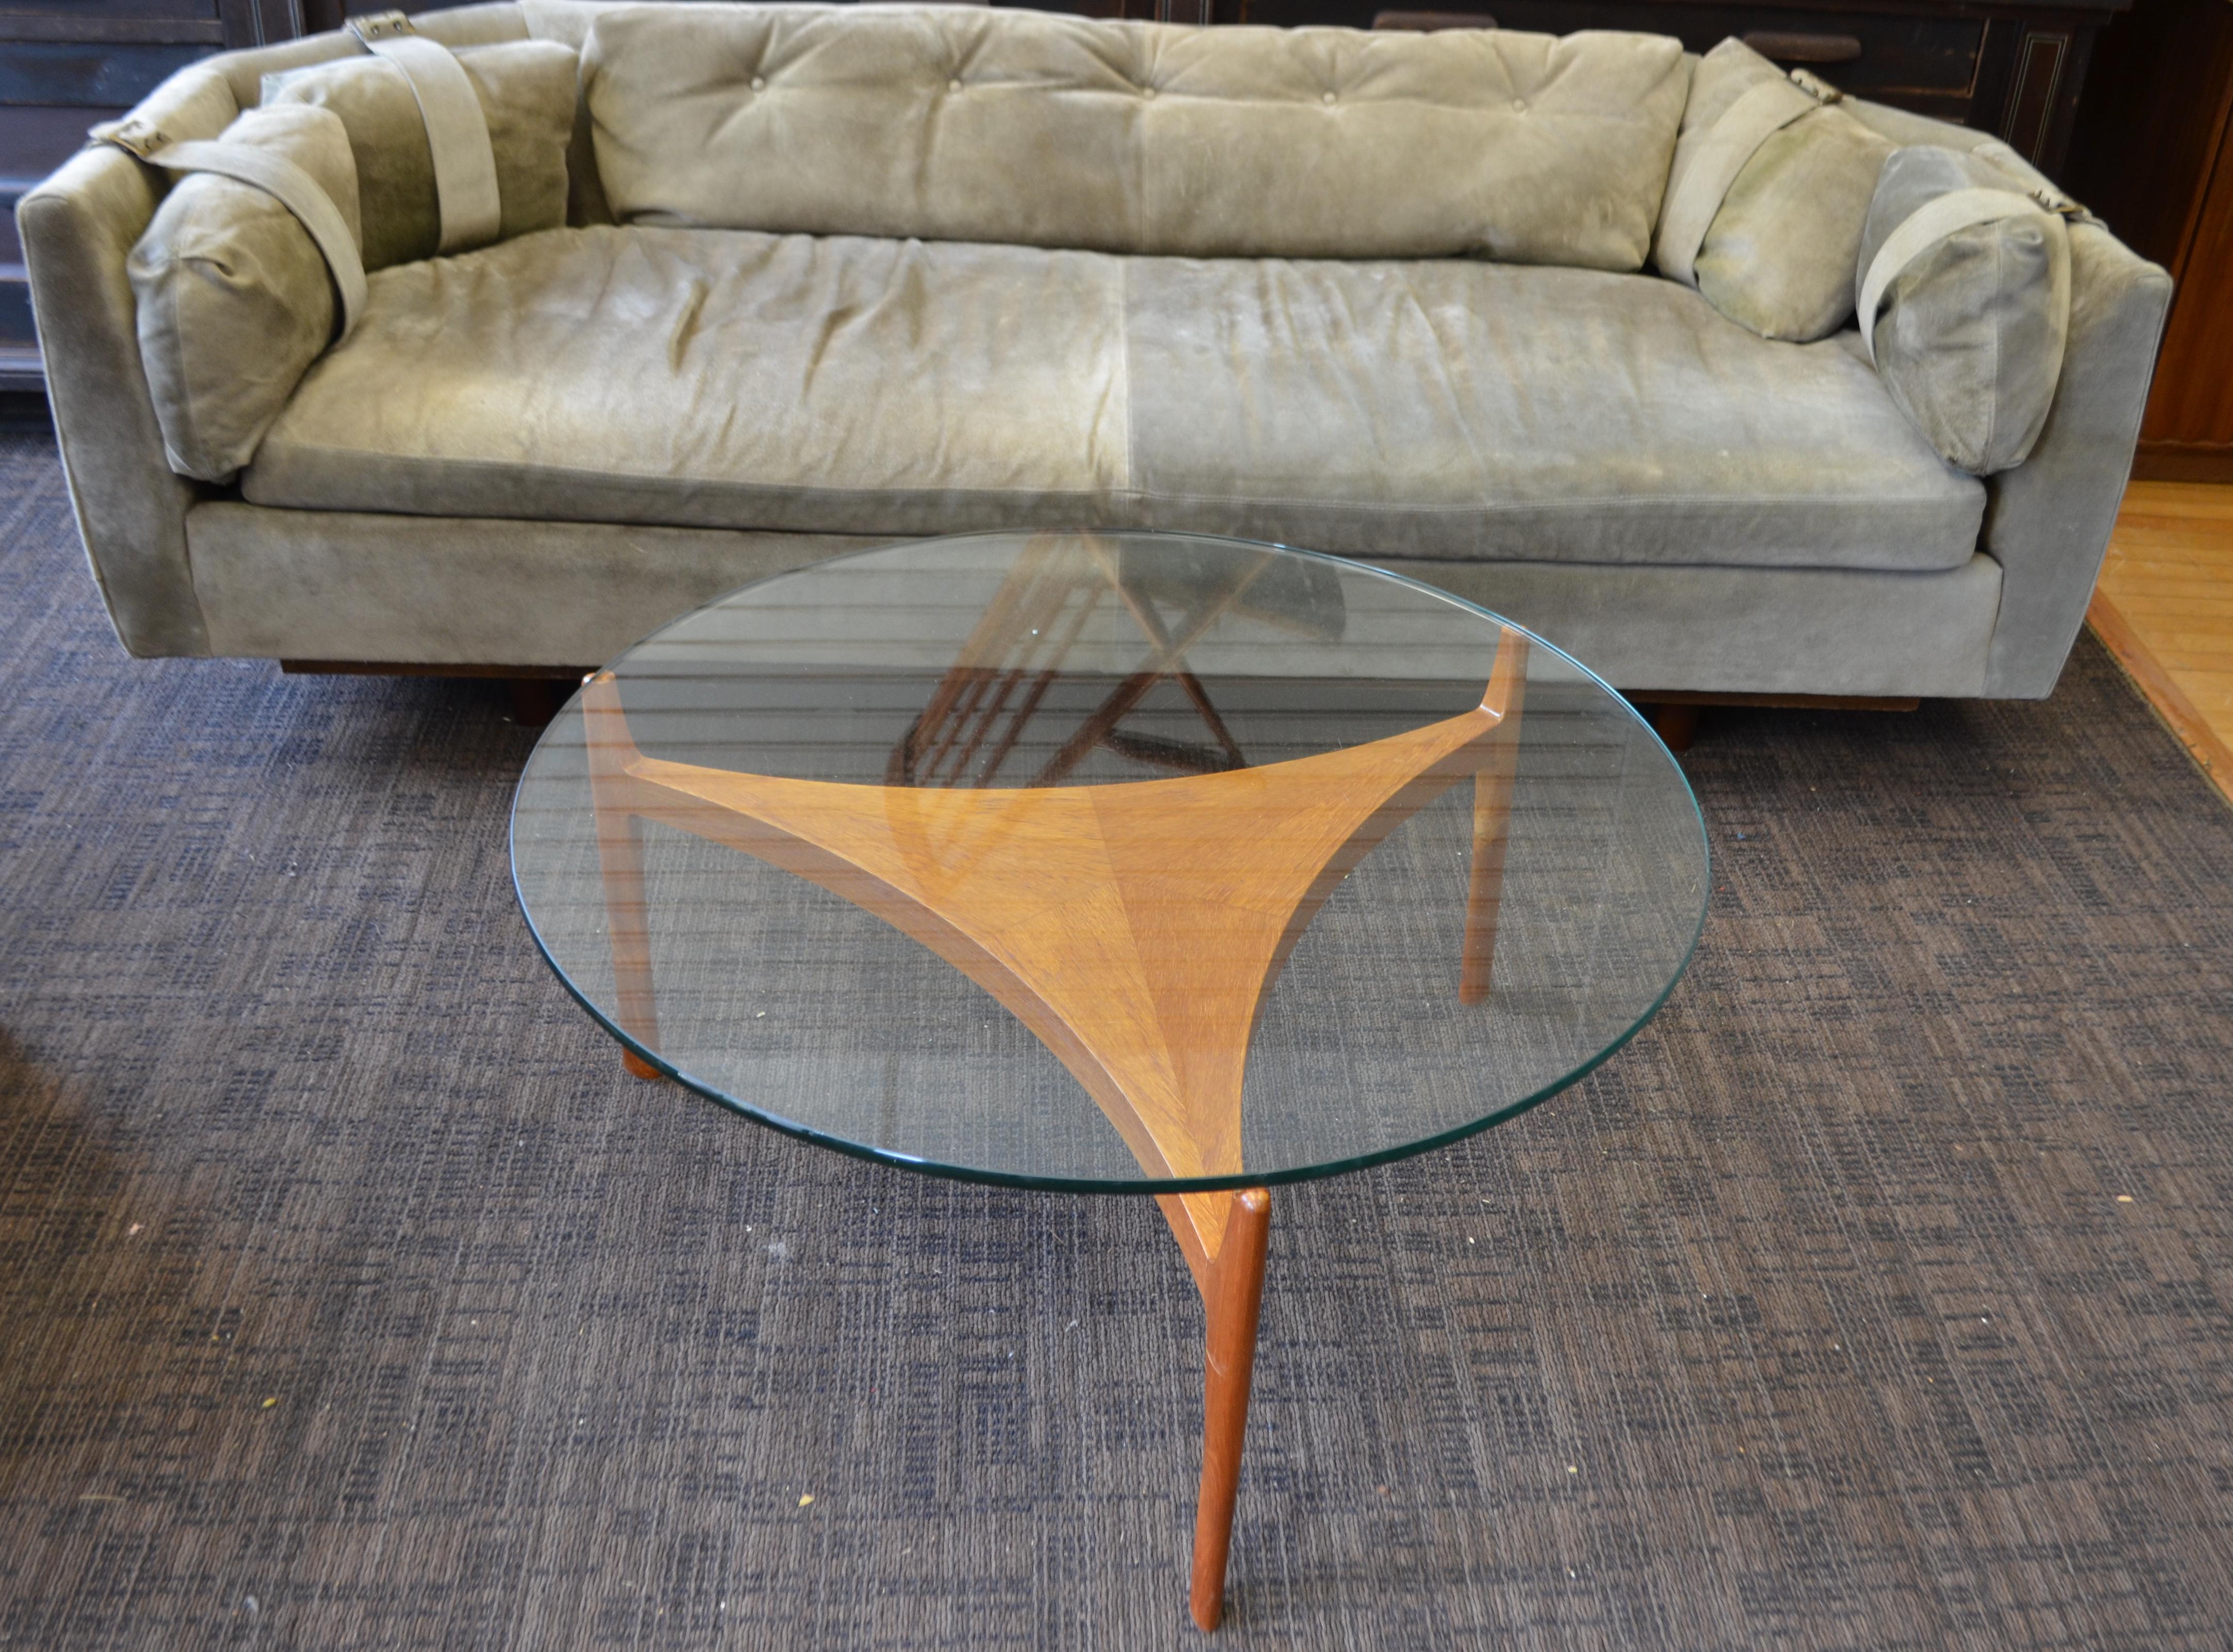 Mid-Century Modern Midcentury Coffee Table with Teak Base and Glass Top Designed by Sven Ellekaer For Sale